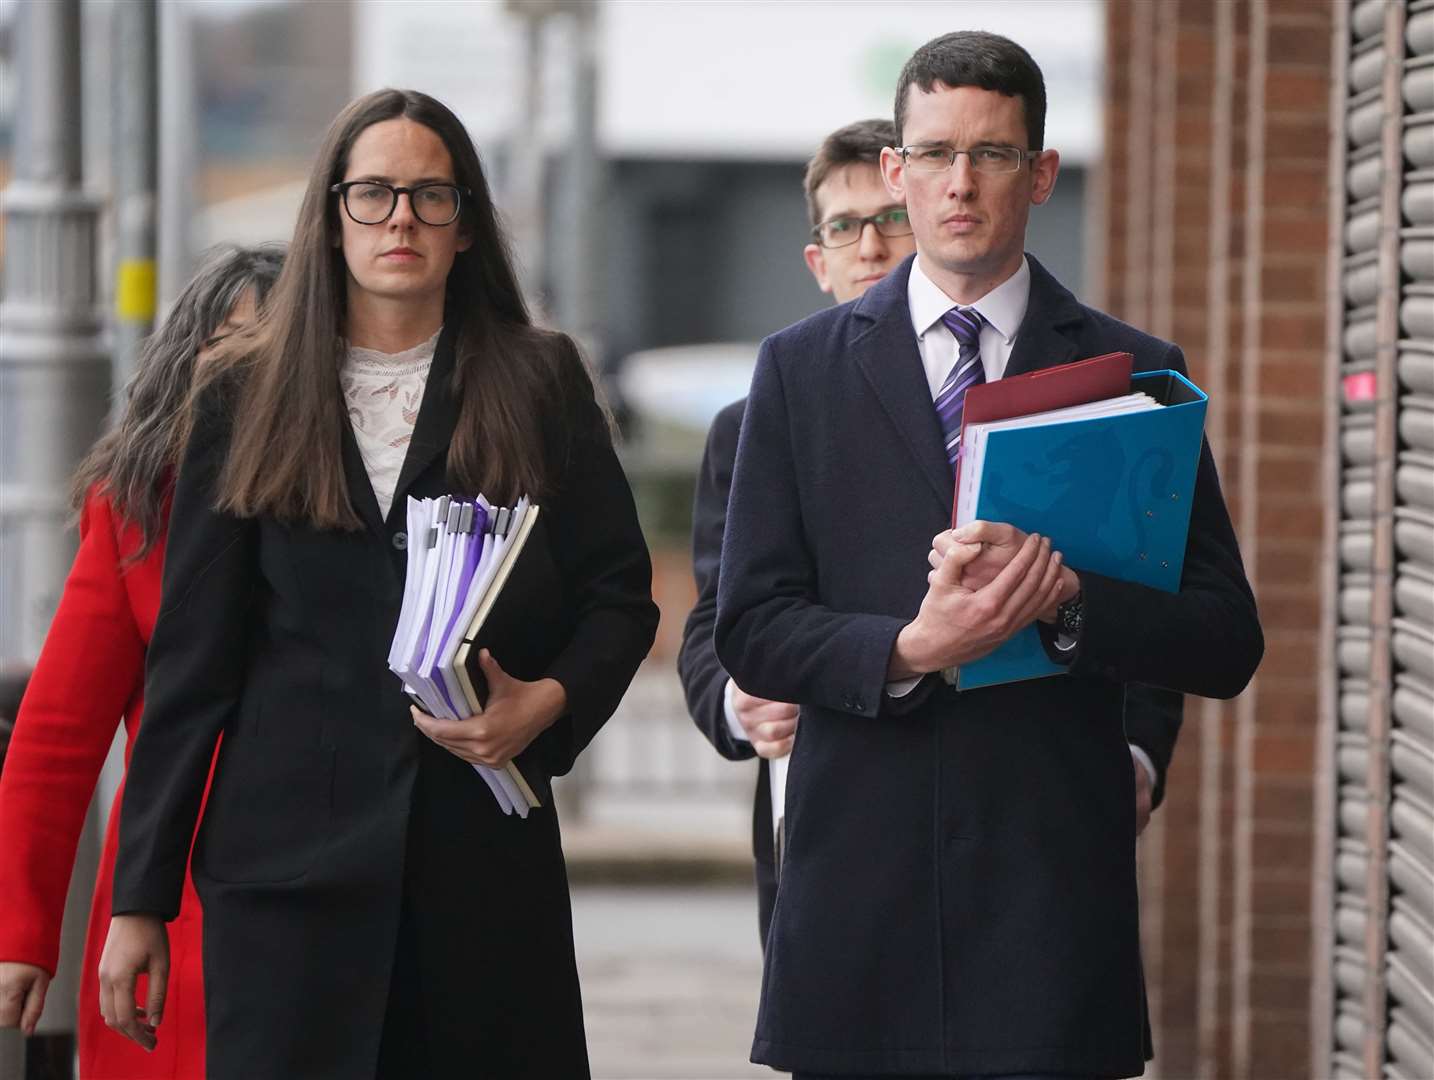 Enoch Burke and his sister Ammi Burke outside the High Court in Dublin (Niall Carson/PA)